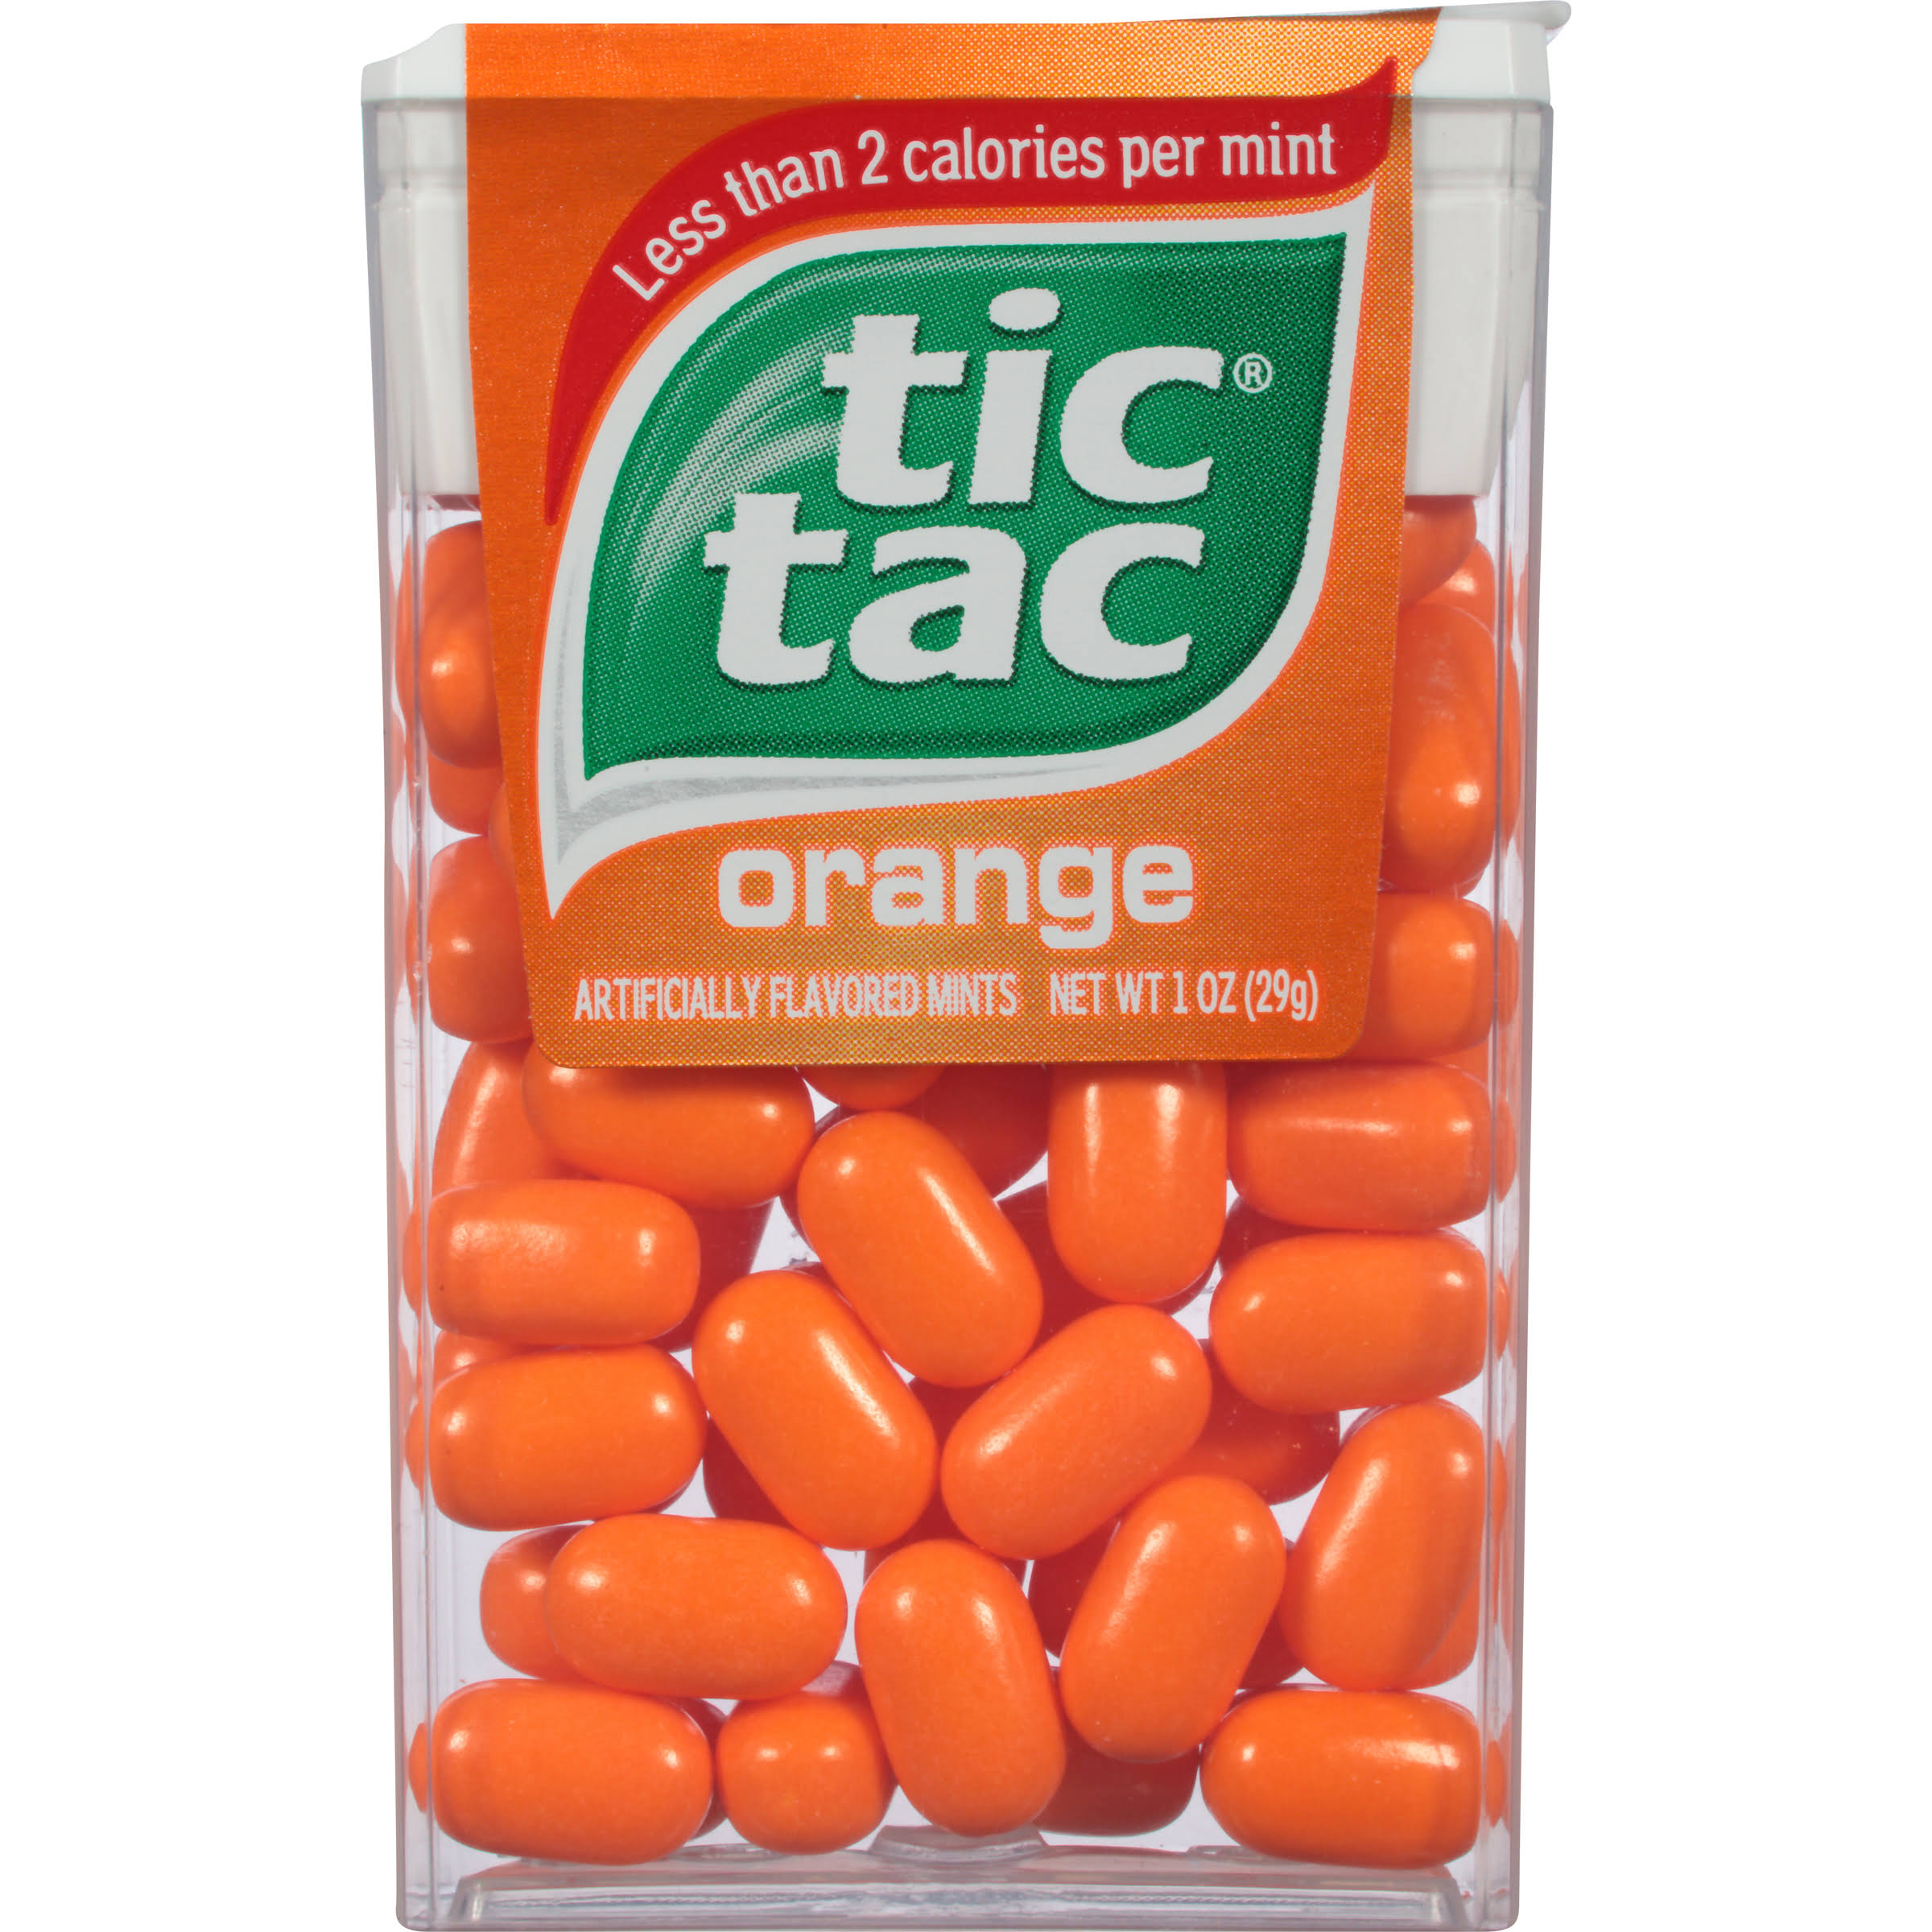 Tic Tac Artificially Flavored Mints - Orange